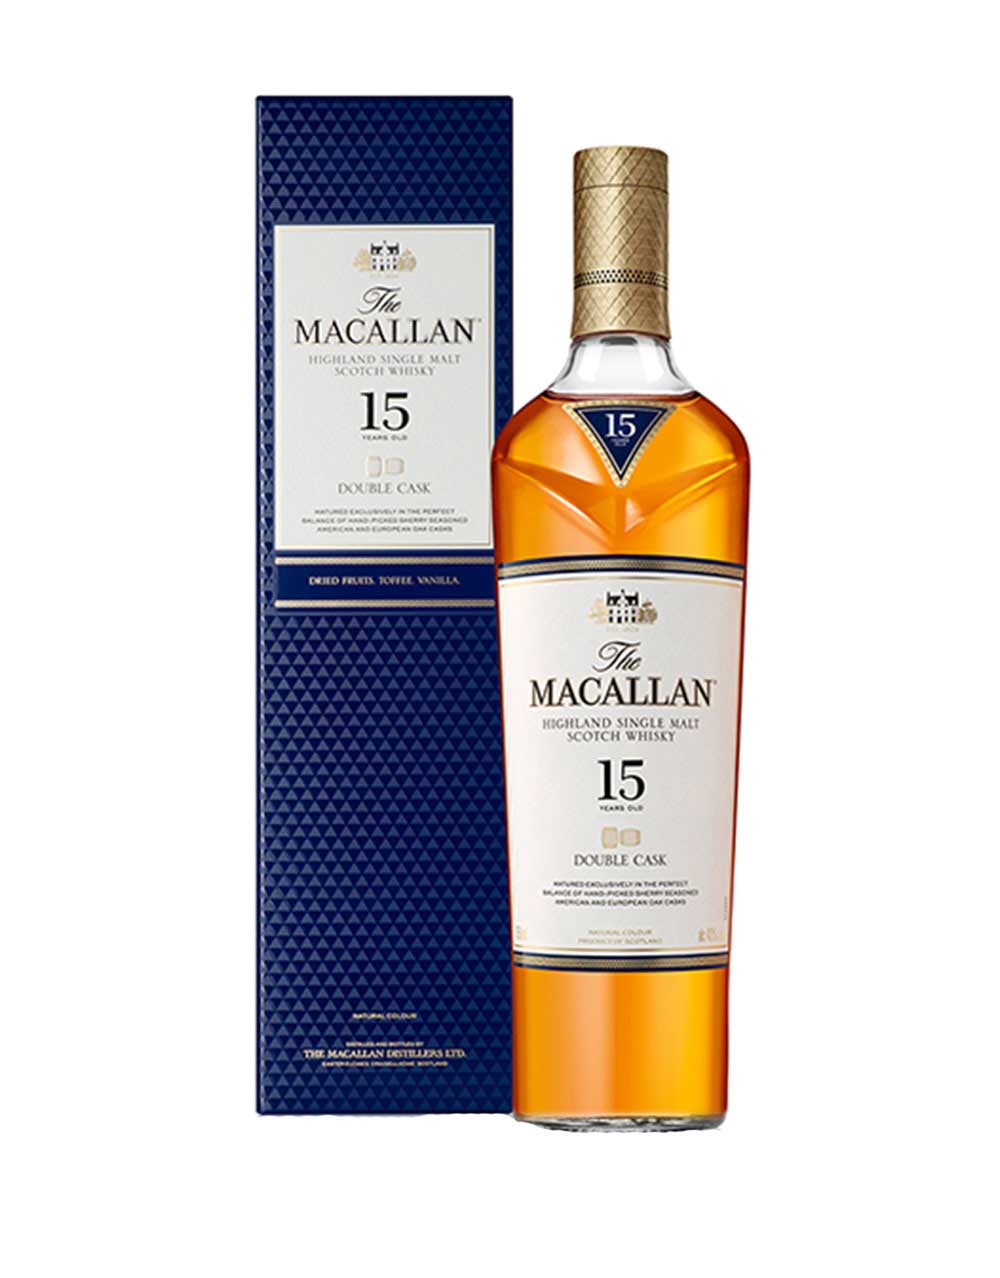 The Macallan Double Cask 15 Year Old Scotch Whisky